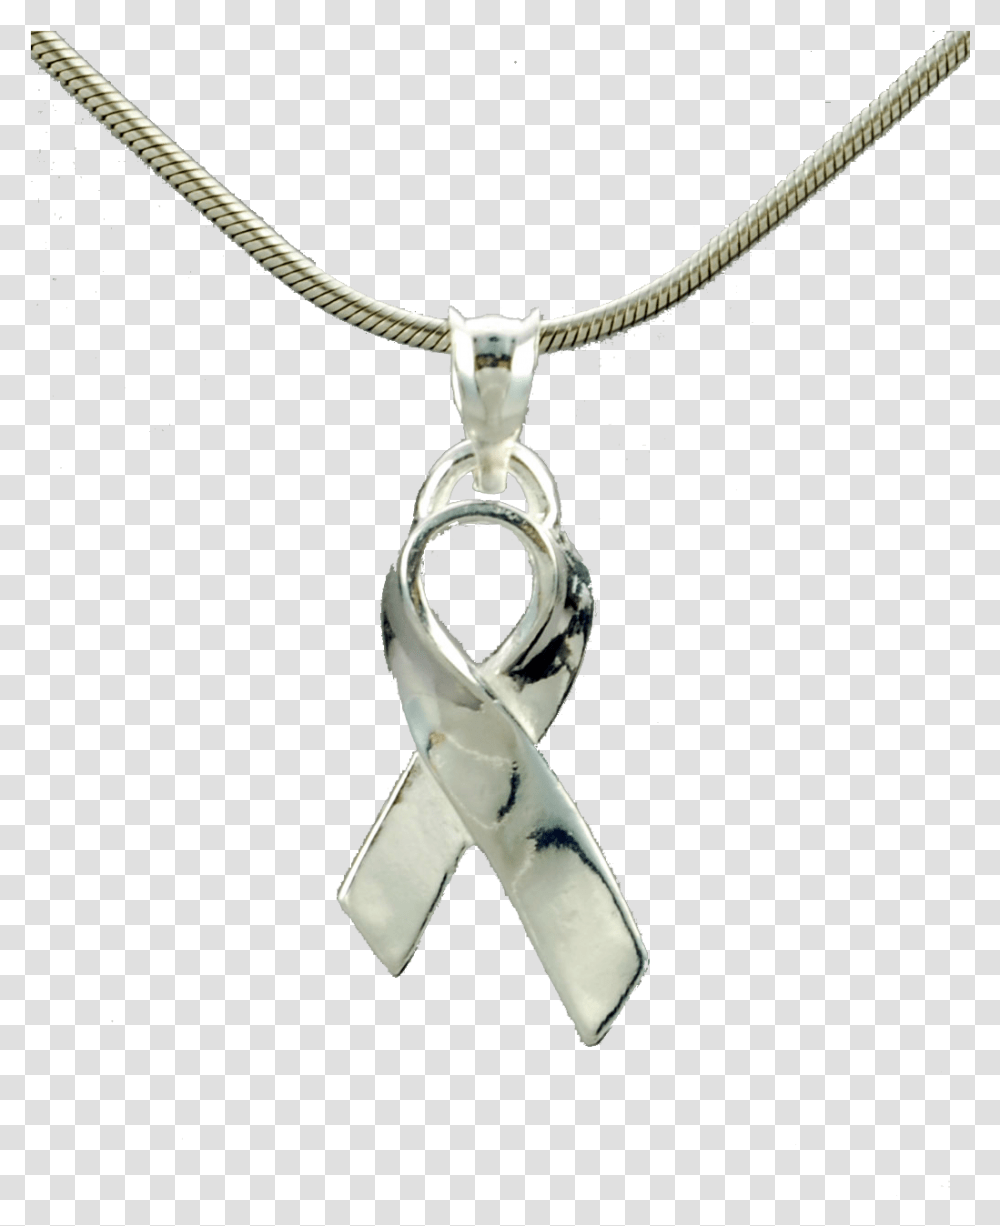 Awareness Ribbon Pendant Locket, Necklace, Jewelry, Accessories, Accessory Transparent Png